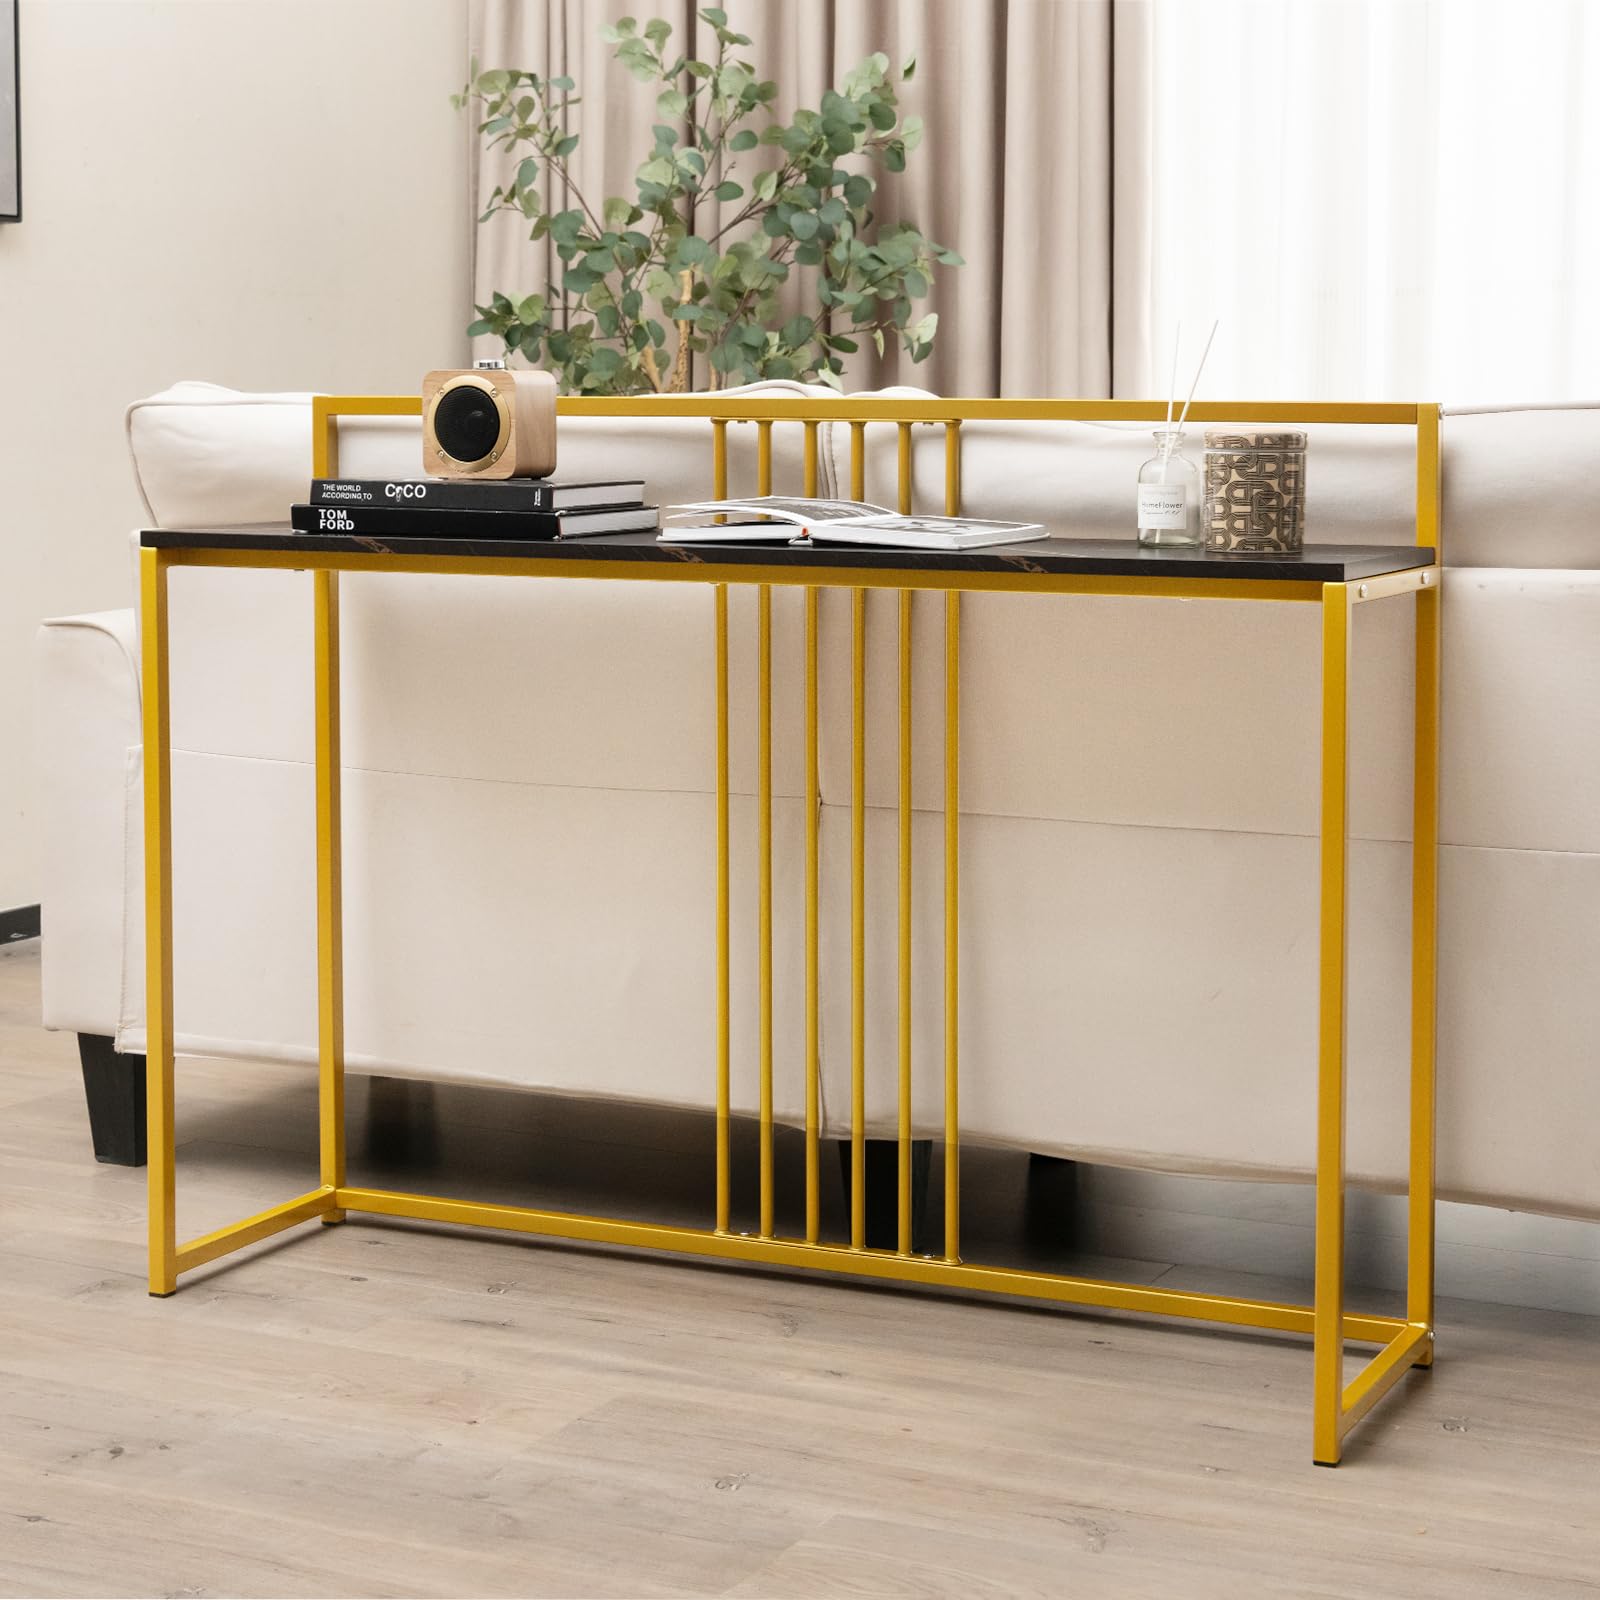 Giantex 47" Entryway Console Table - Narrow Hallway Table w/Sturdy Gold Metal Frame, Anti-Tipping Kits